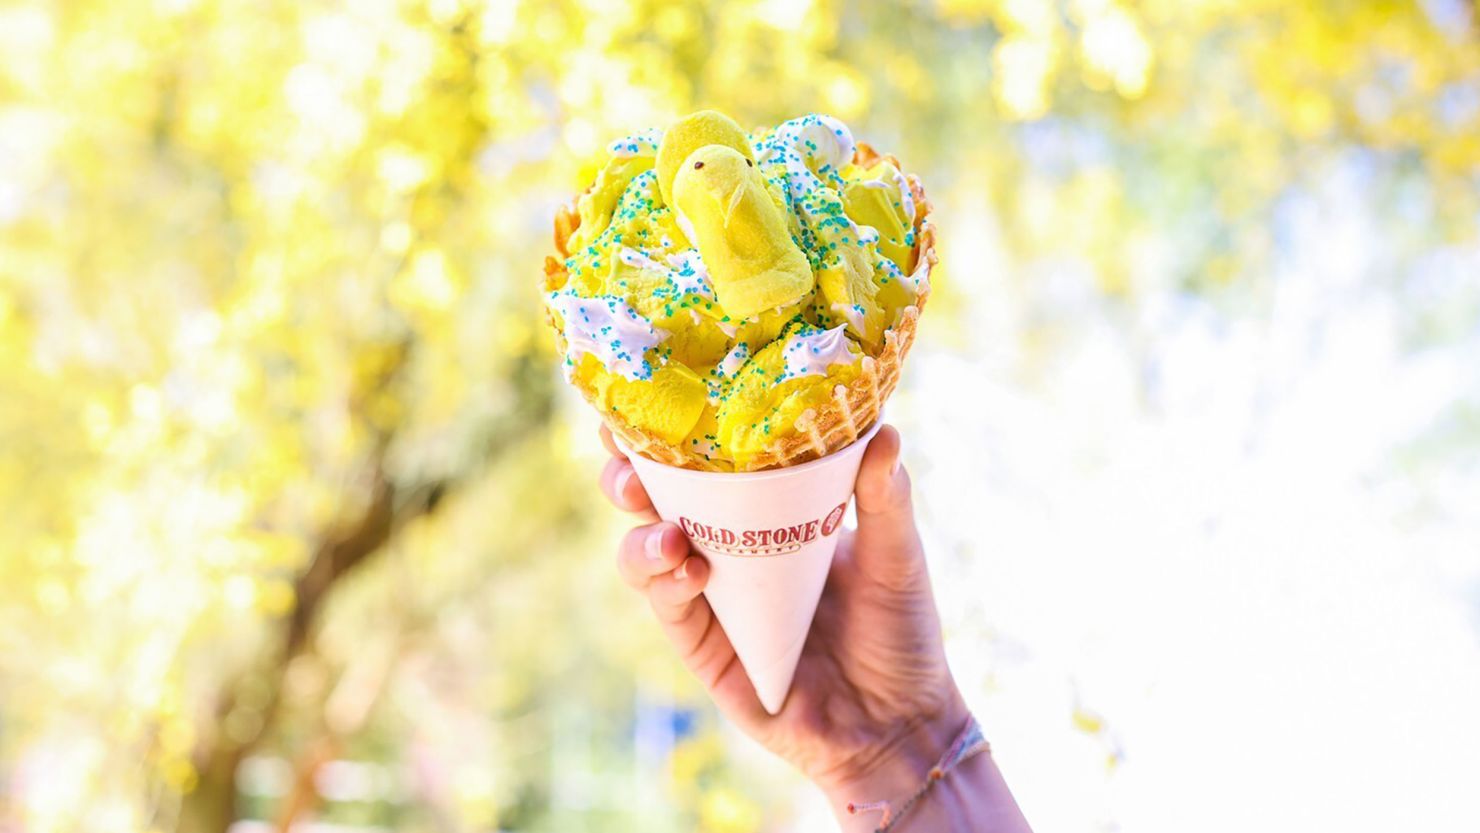 Peeps-flavored ice cream will be available at Cold Stone Creamery until the end of April.